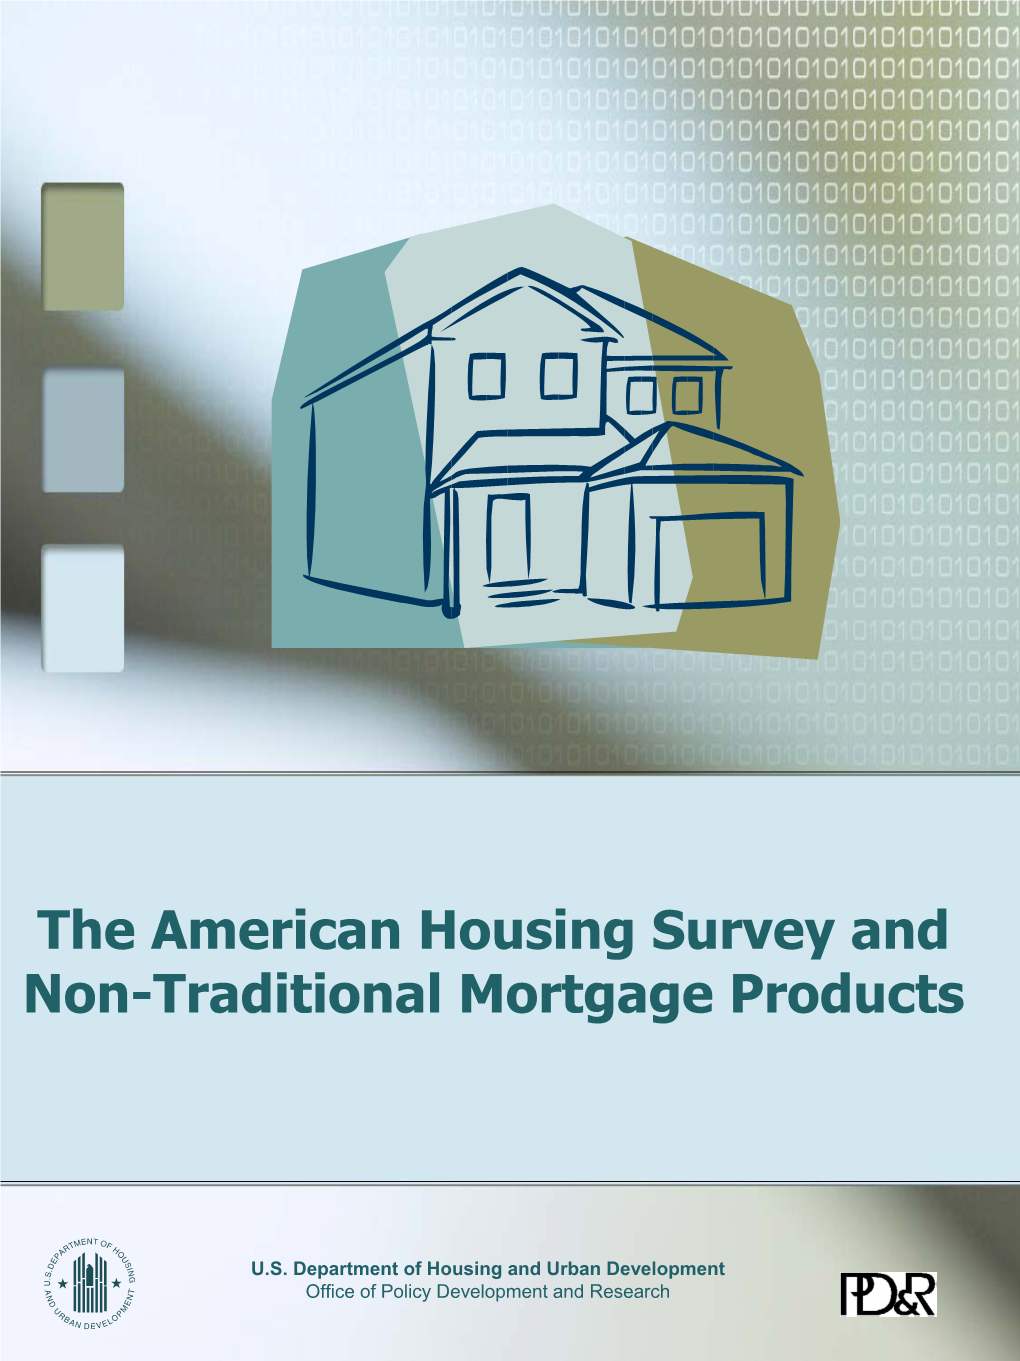 The American Housing Survey and Non-Traditional Mortgage Products